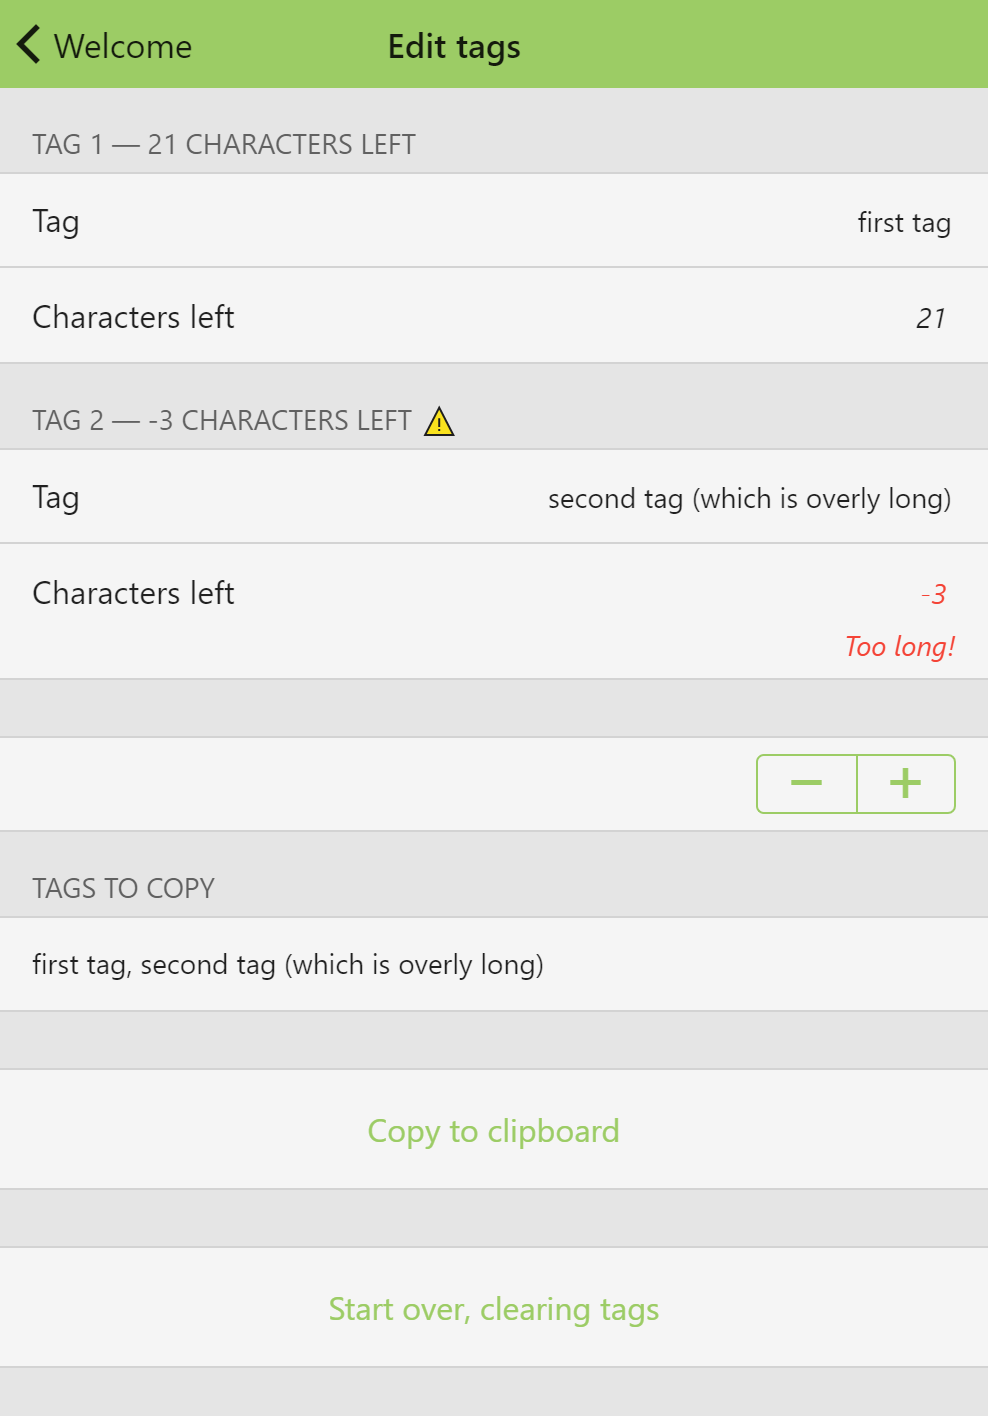 Editing new tags in the Tag Editor